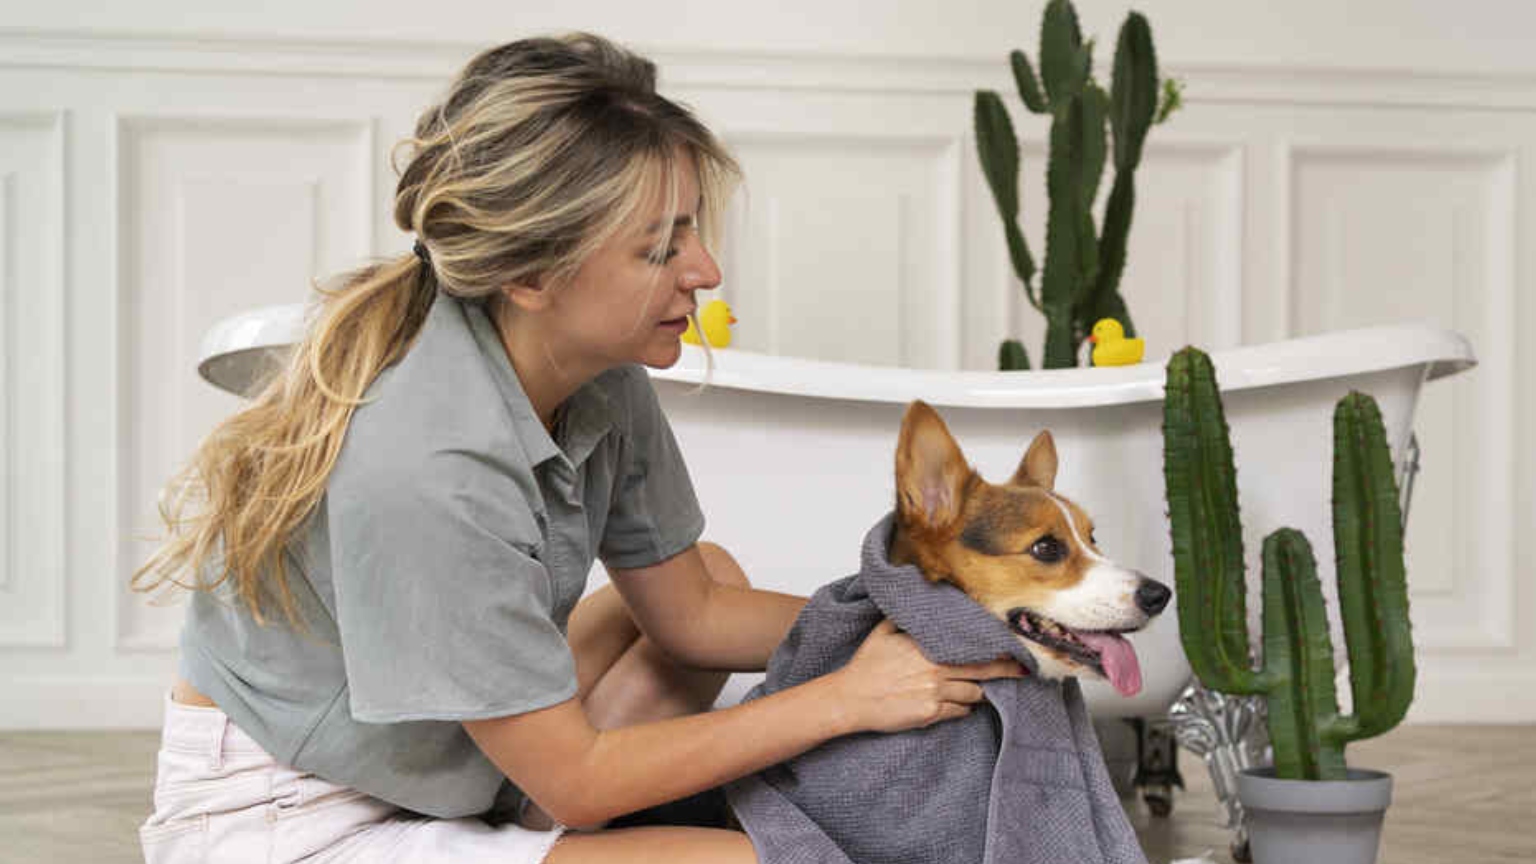 How to Restrain a Dog with a Towel